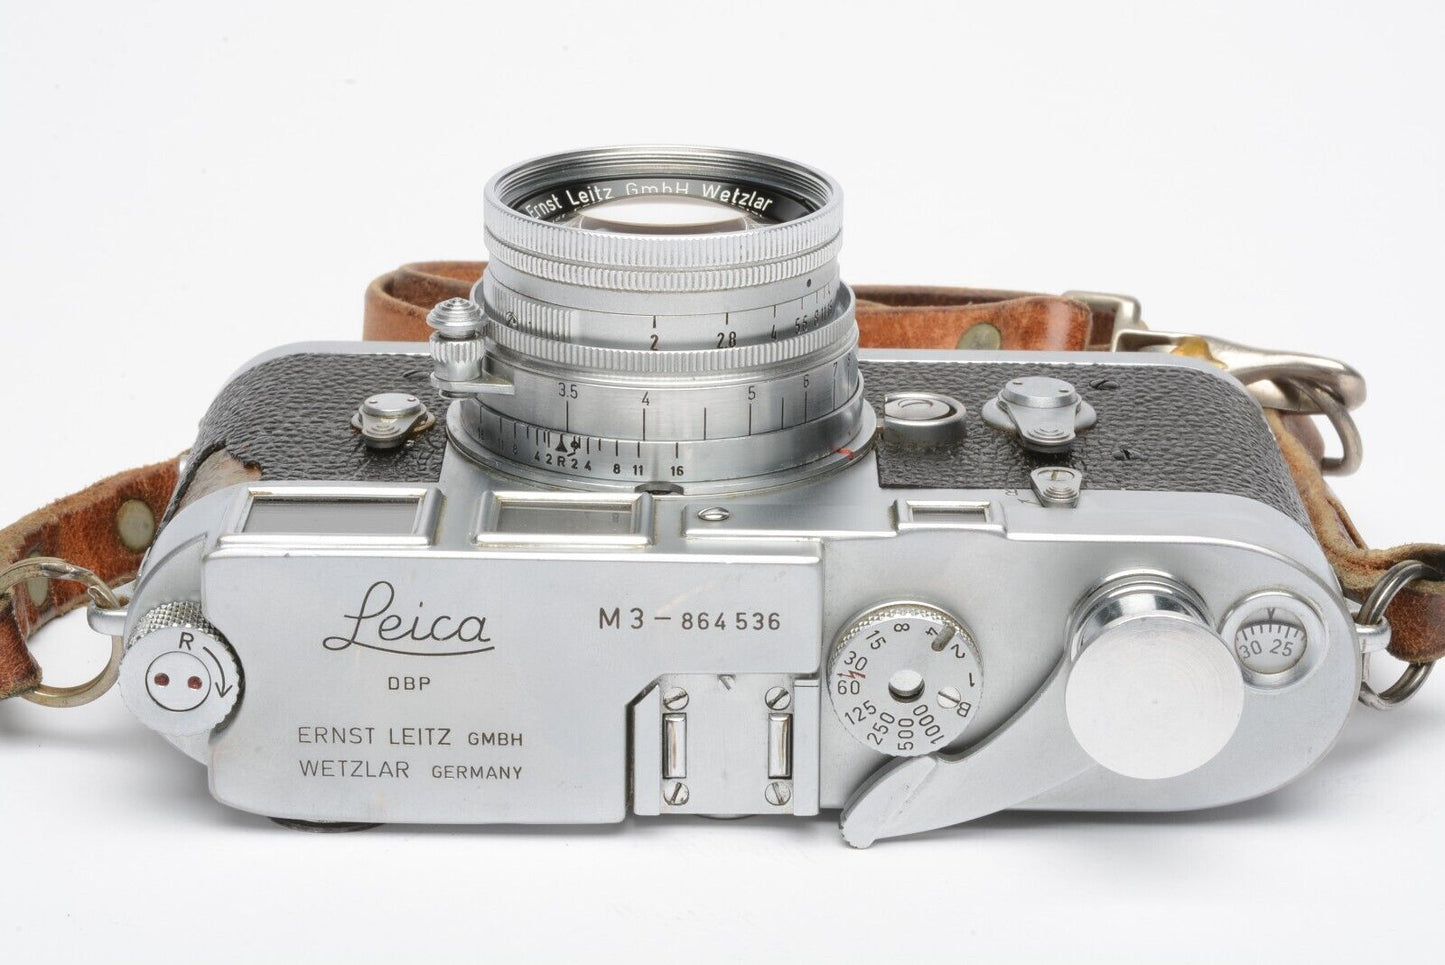 EXC++ LEICA M3 DS BODY w/LEITZ SUMMICRON 5cm F2, TESTED, ACCURATE, GREAT BUNDLE!